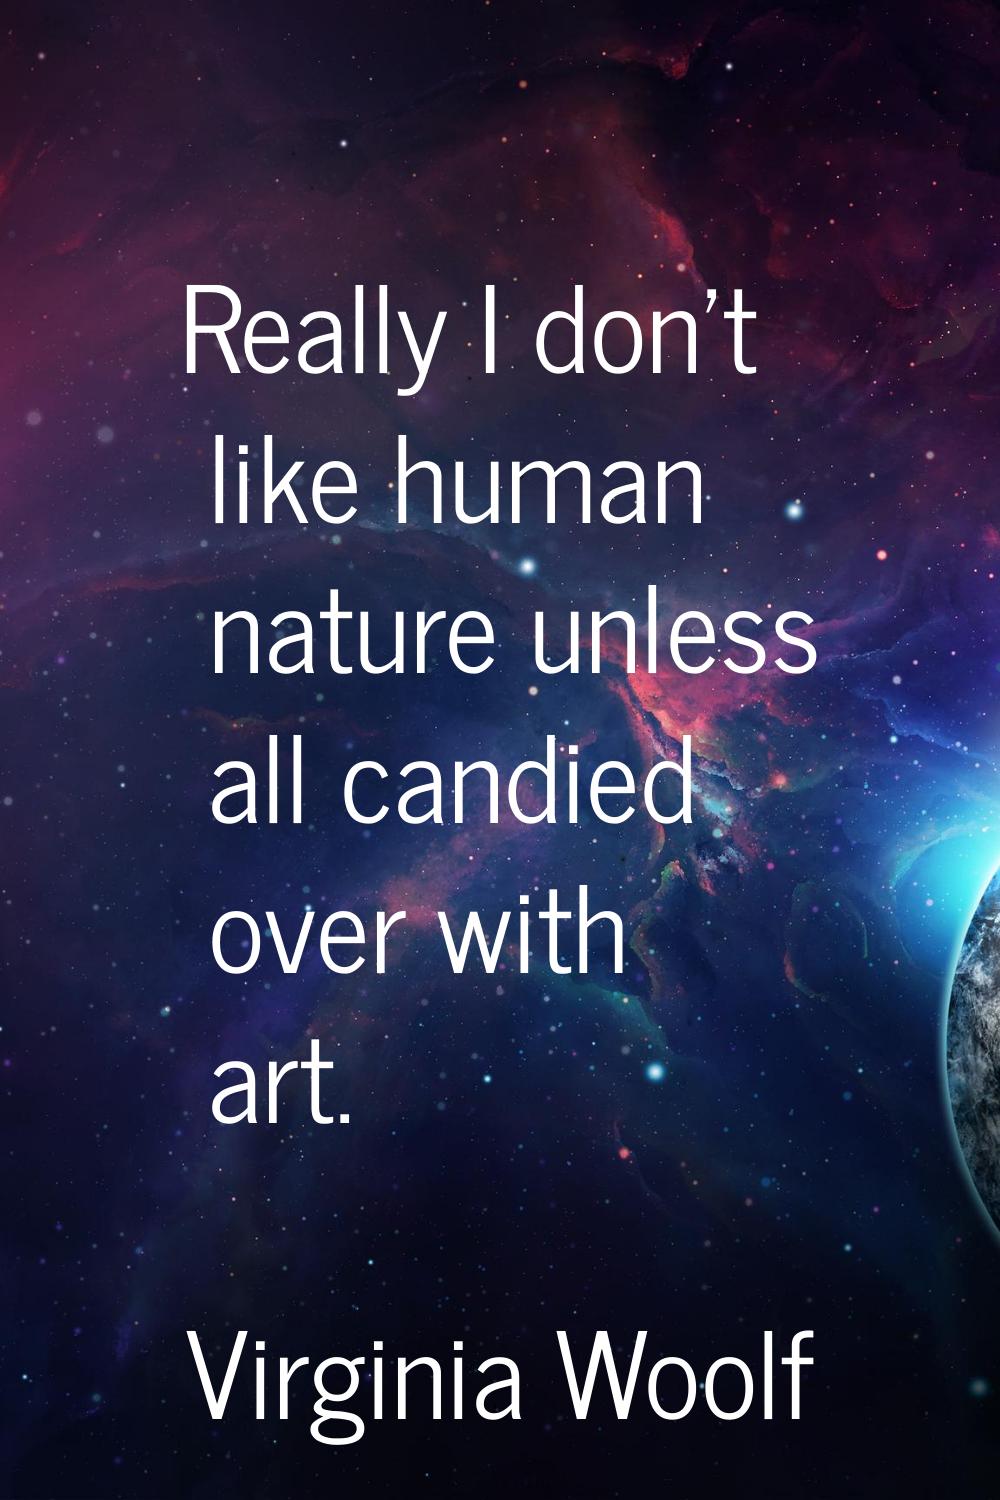 Really I don't like human nature unless all candied over with art.